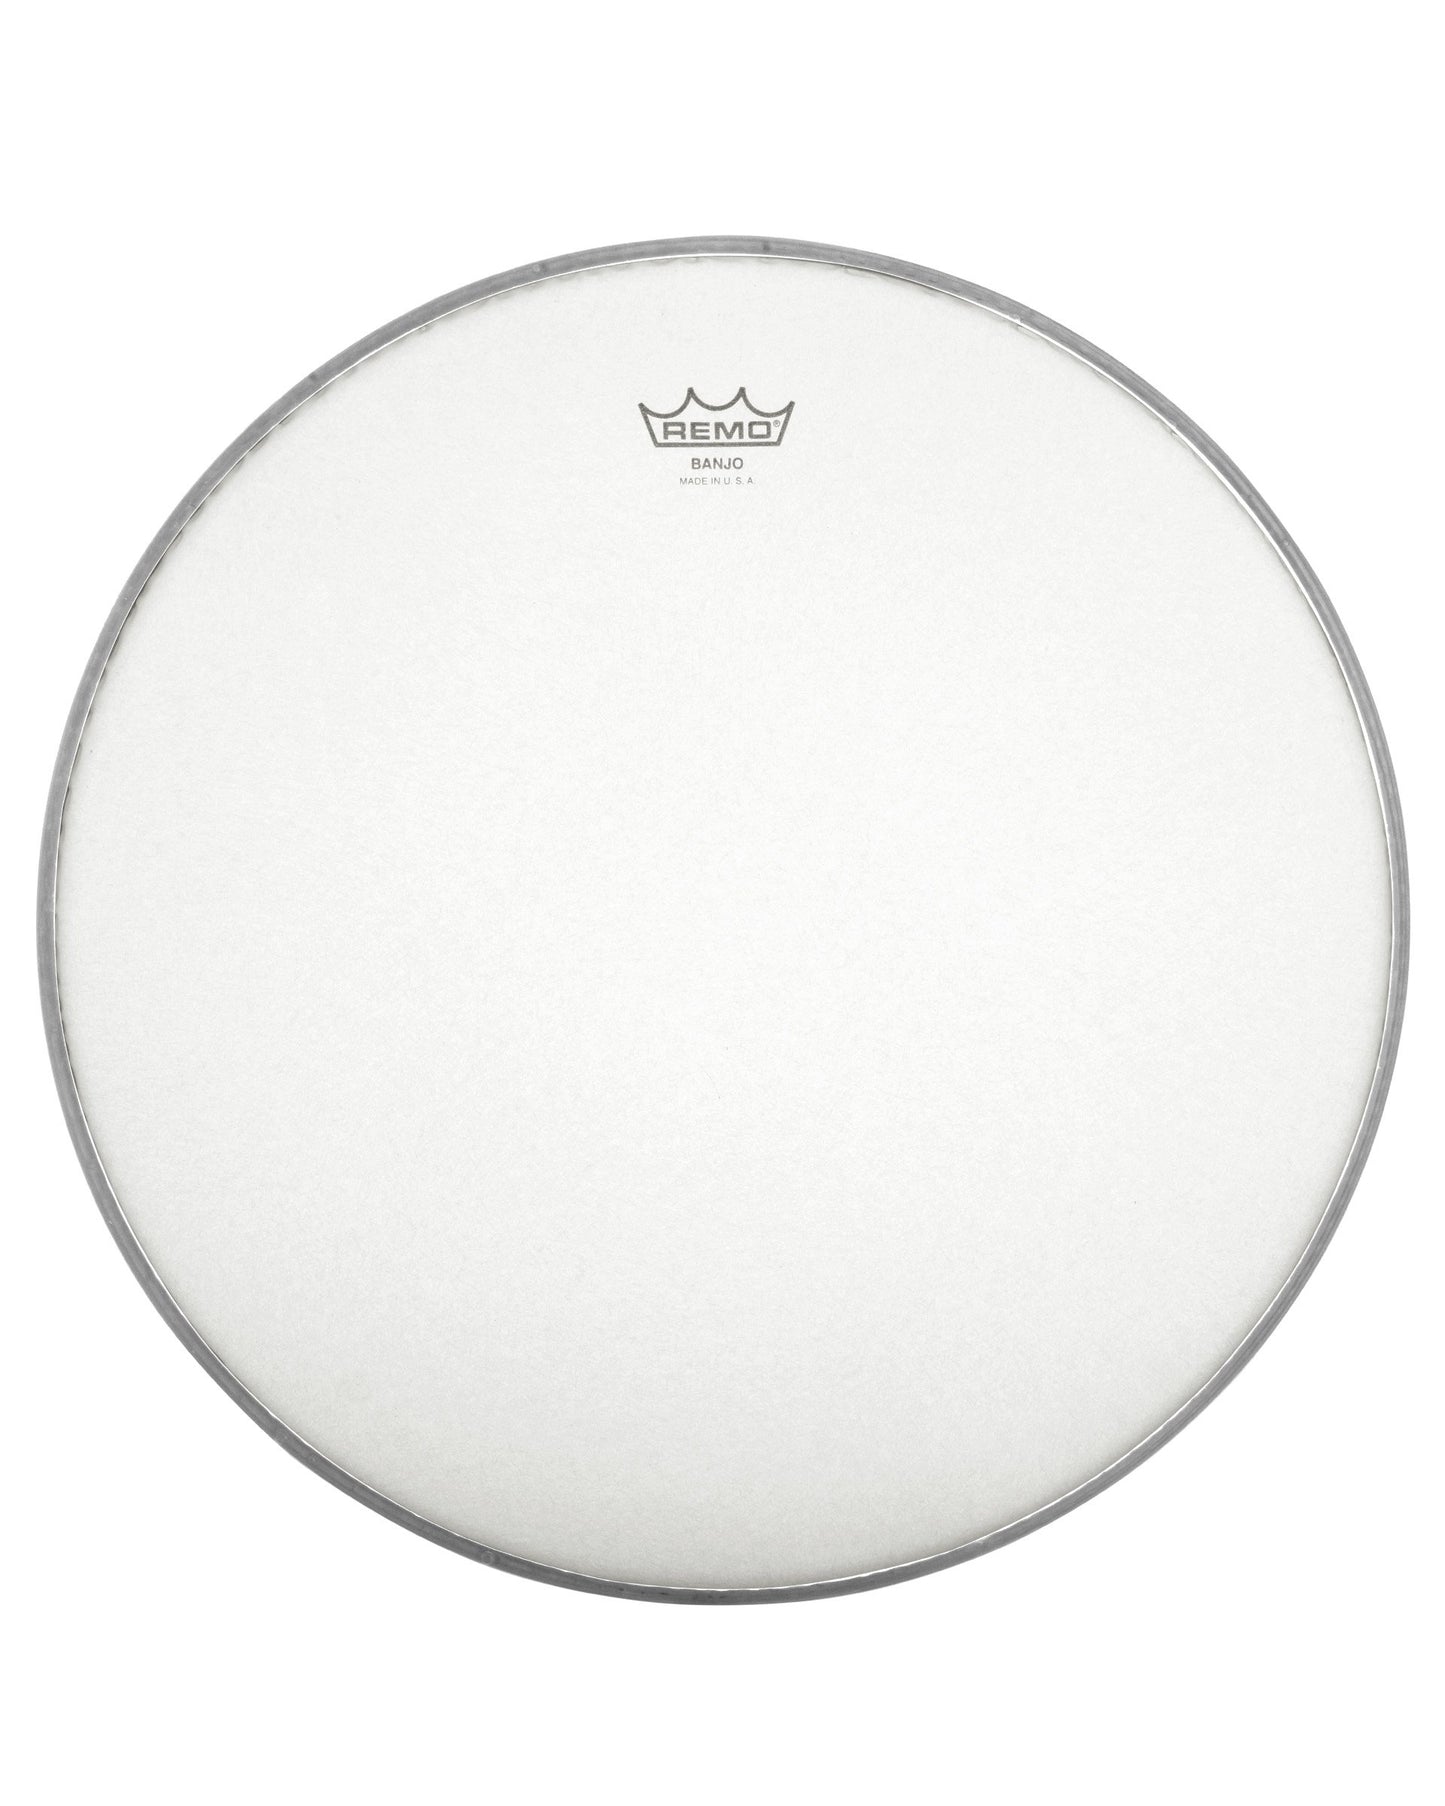 Front of Remo Frosted Top Banjo Head, 11 Inch Diameter, Medium Crown (7/16 Inch)